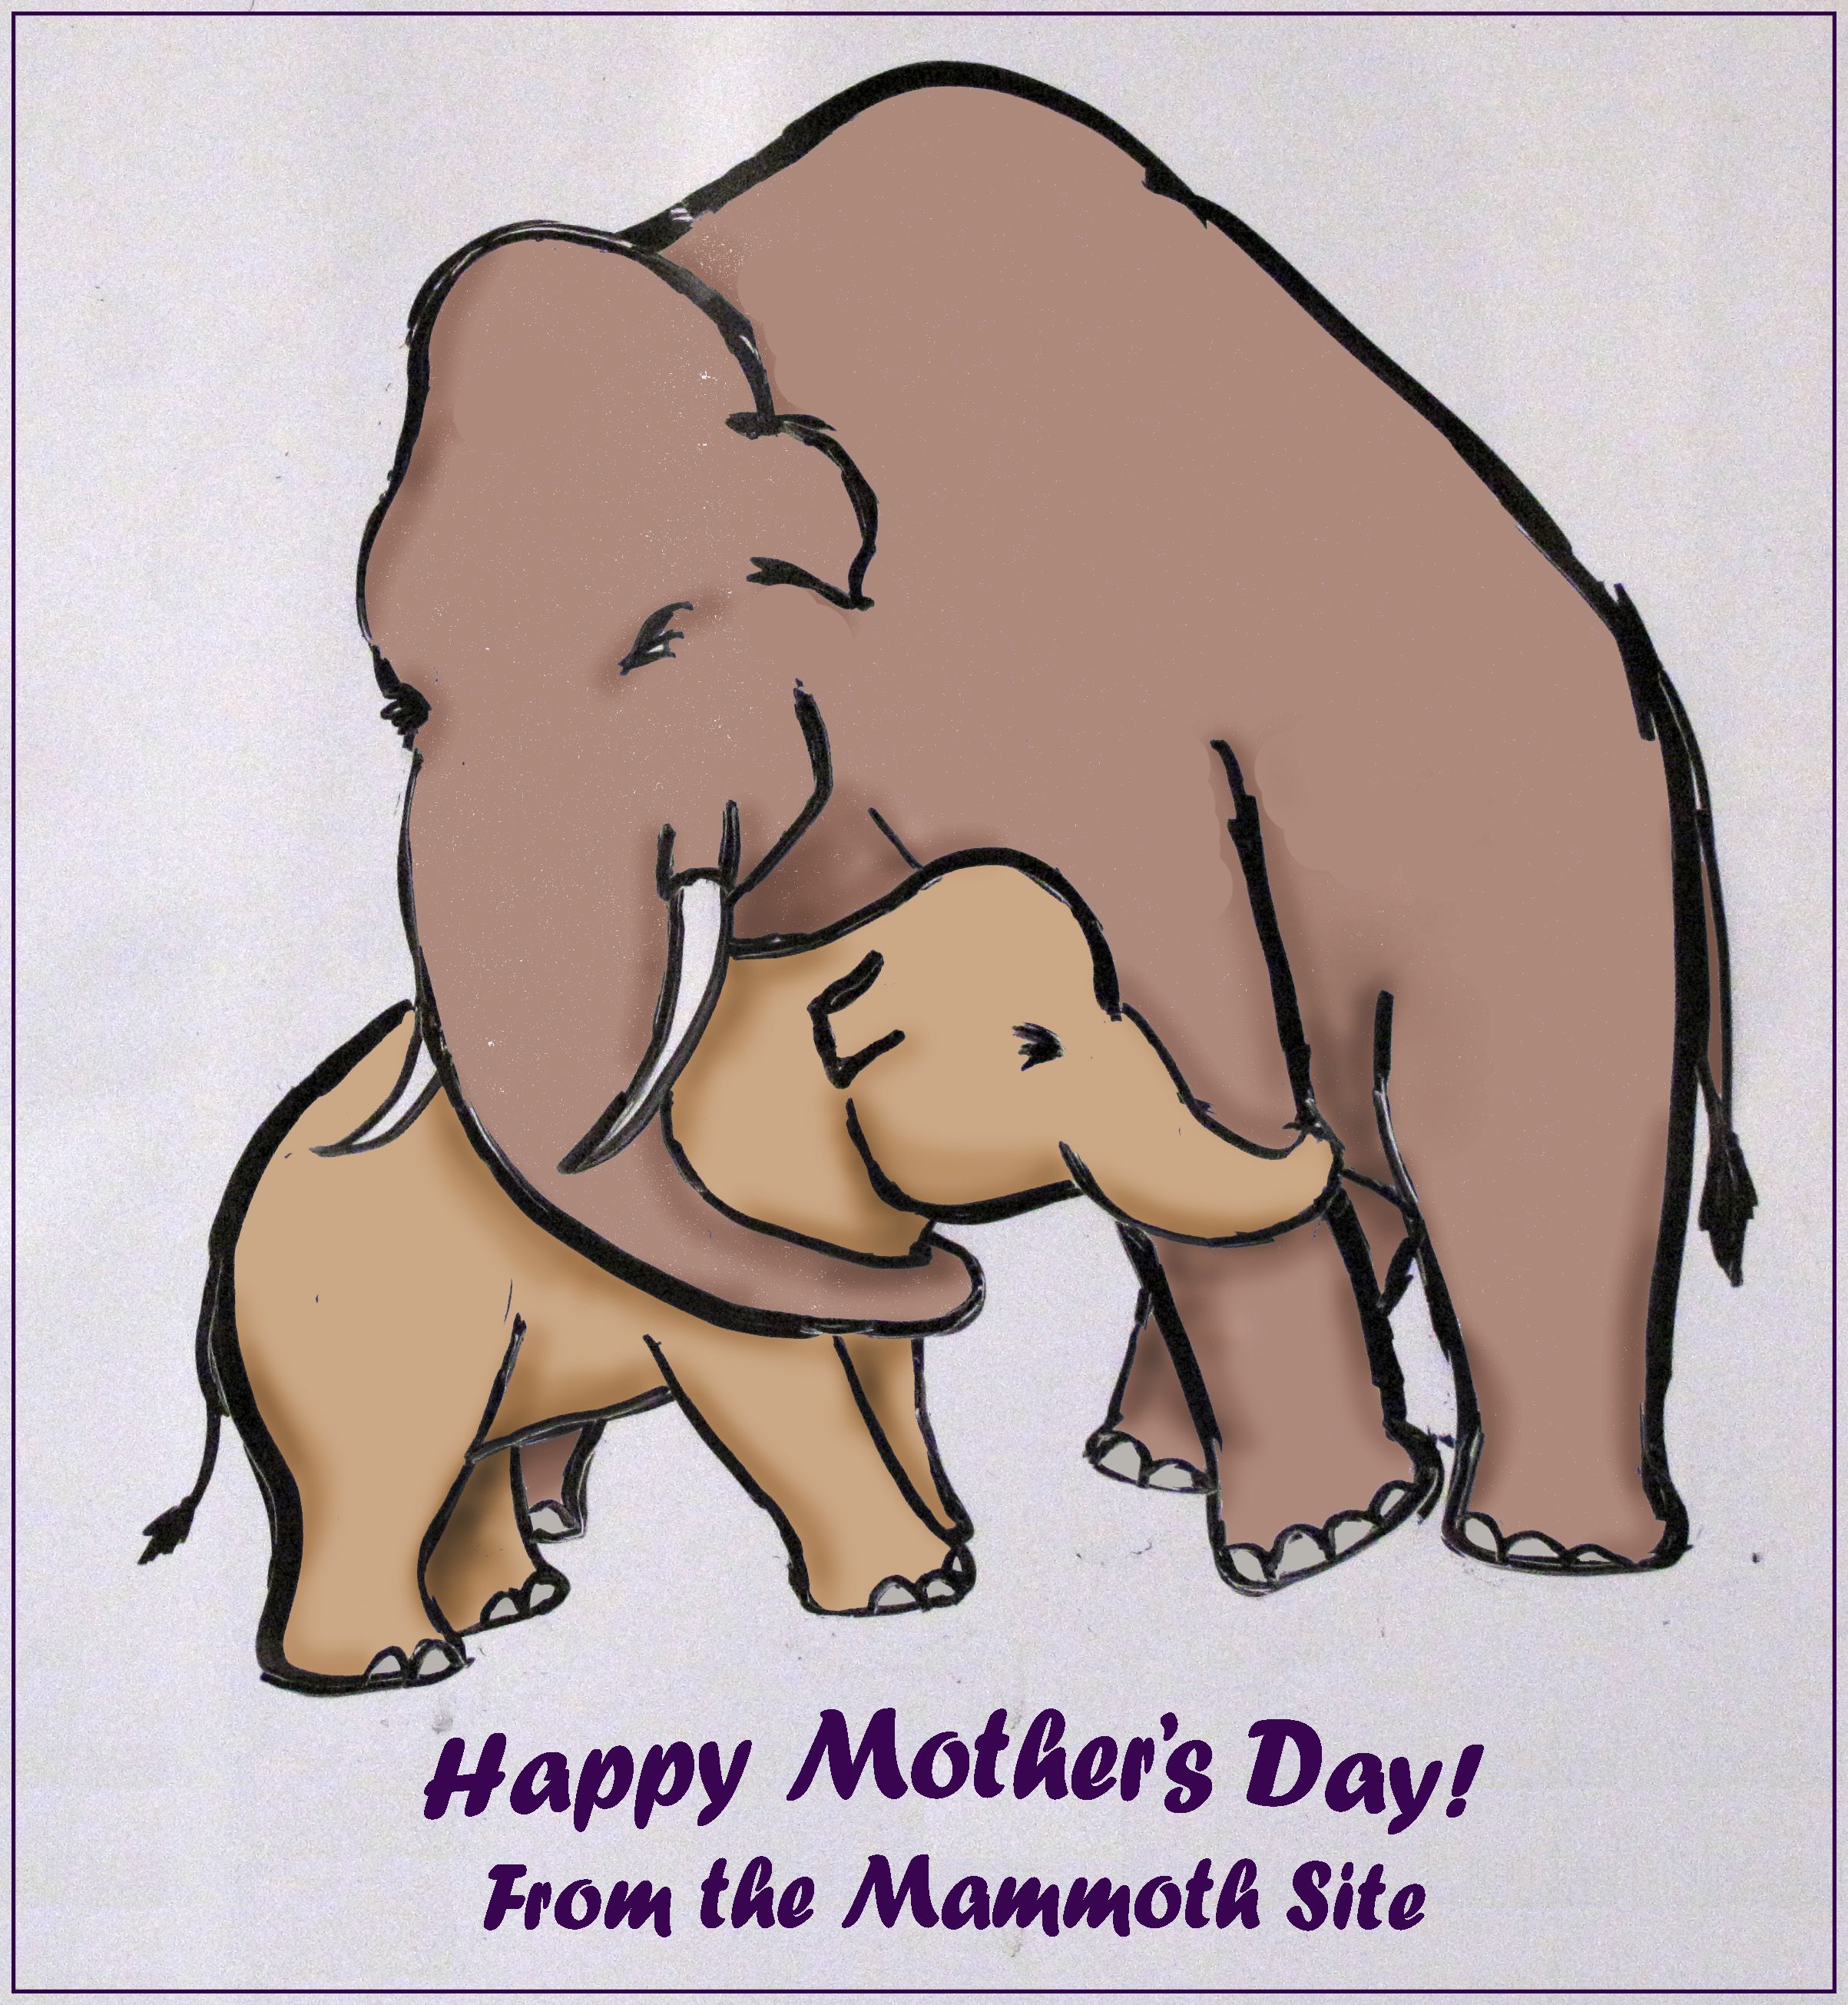 Mother’s Day Care and Share at The Mammoth Site